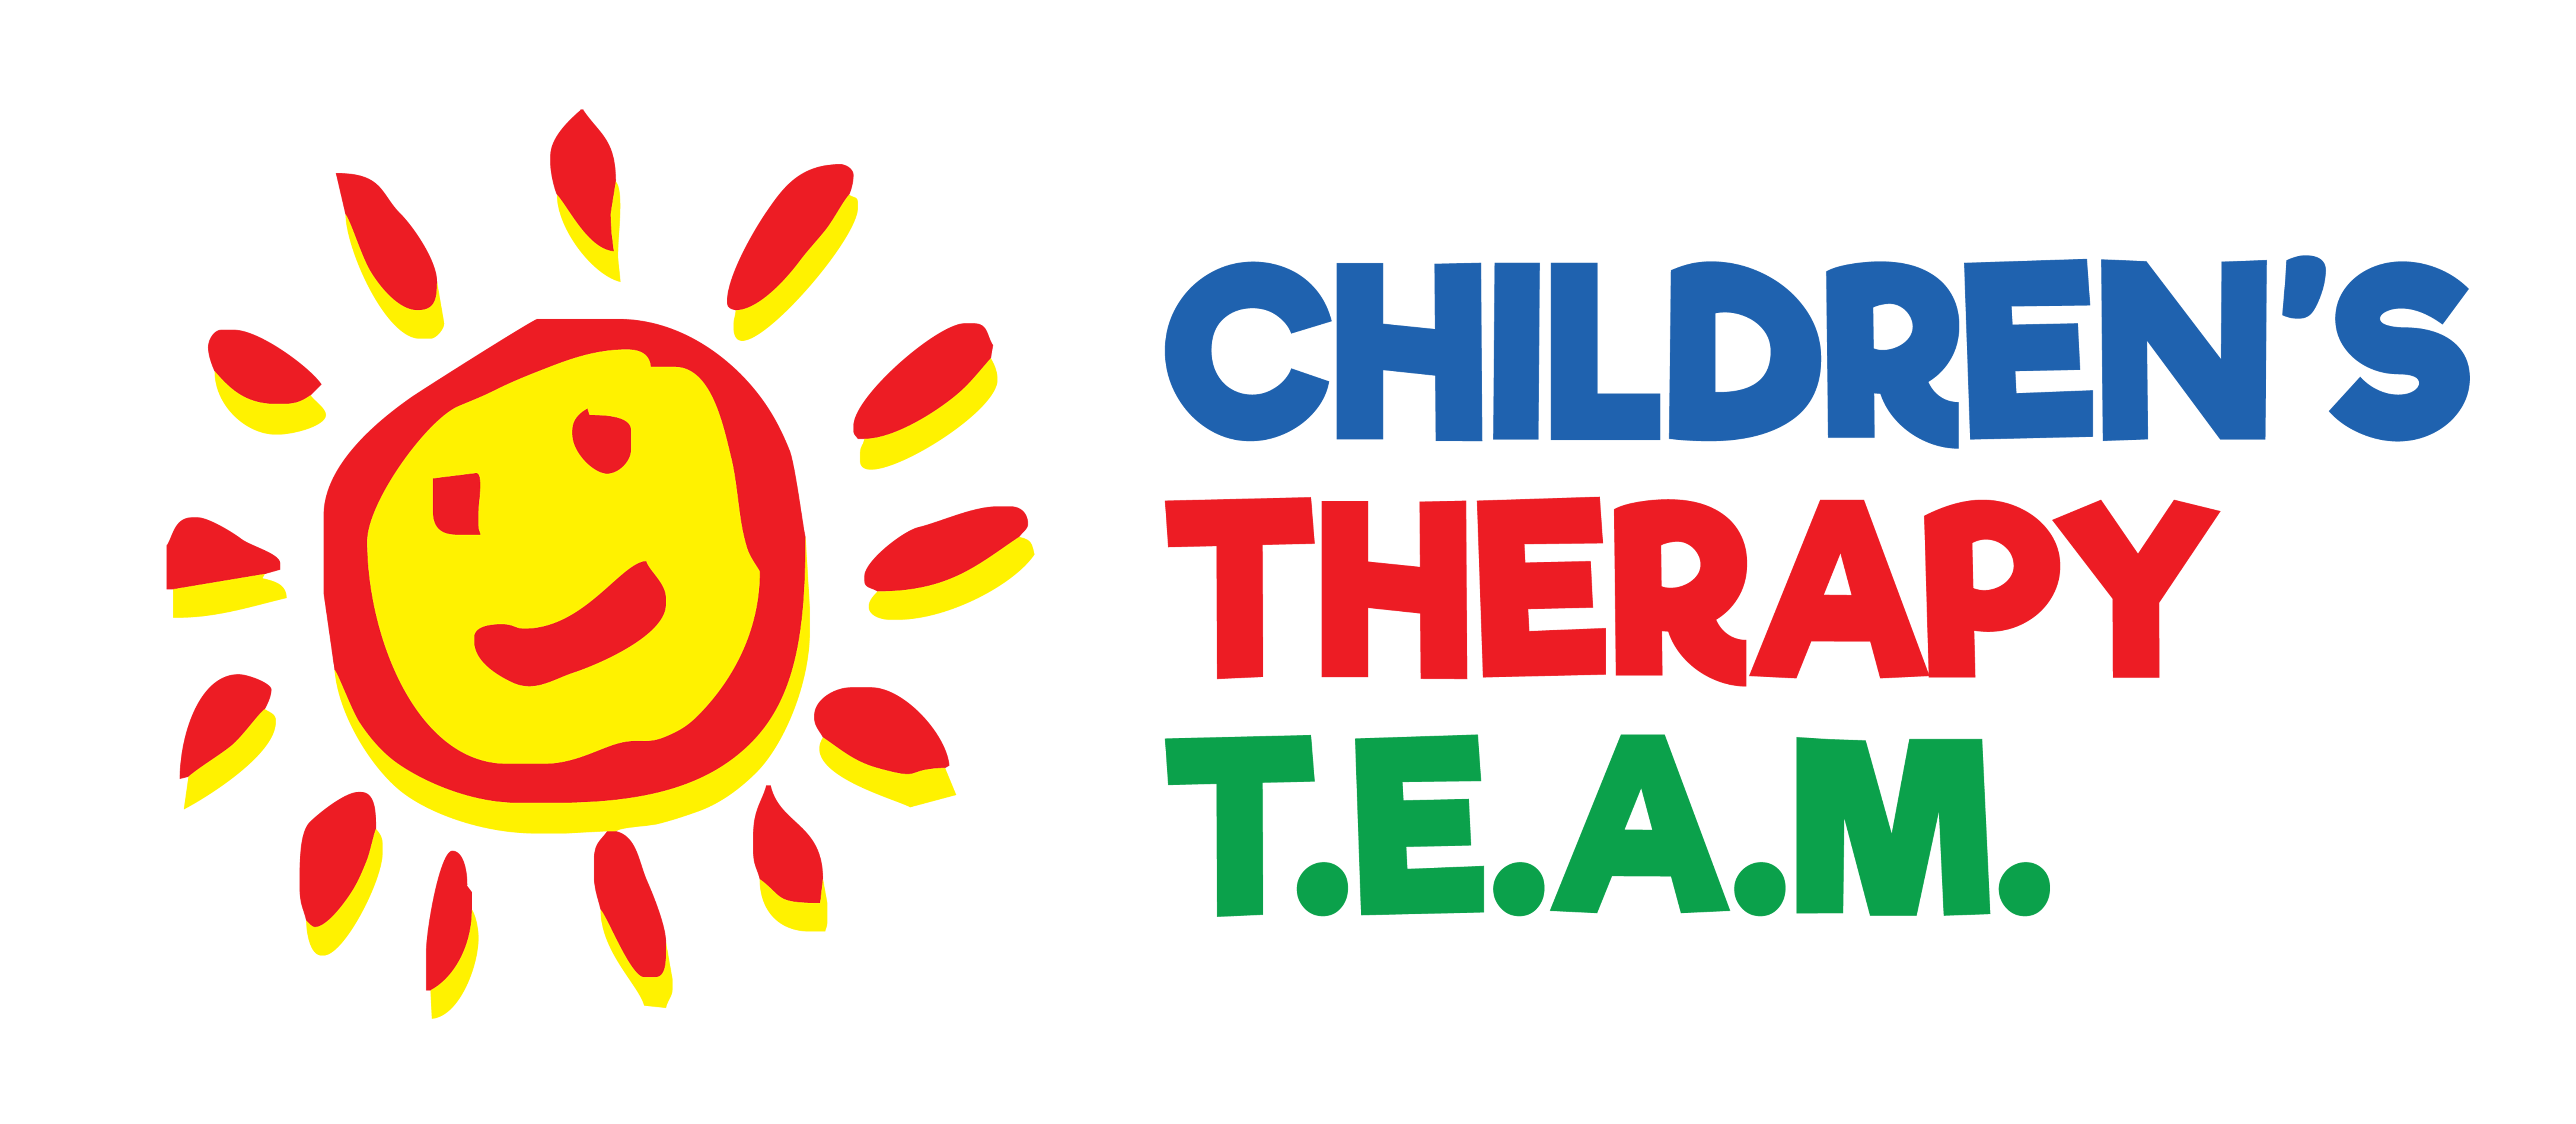 The Sippy Cup Transition - Childrens Therapy TEAM